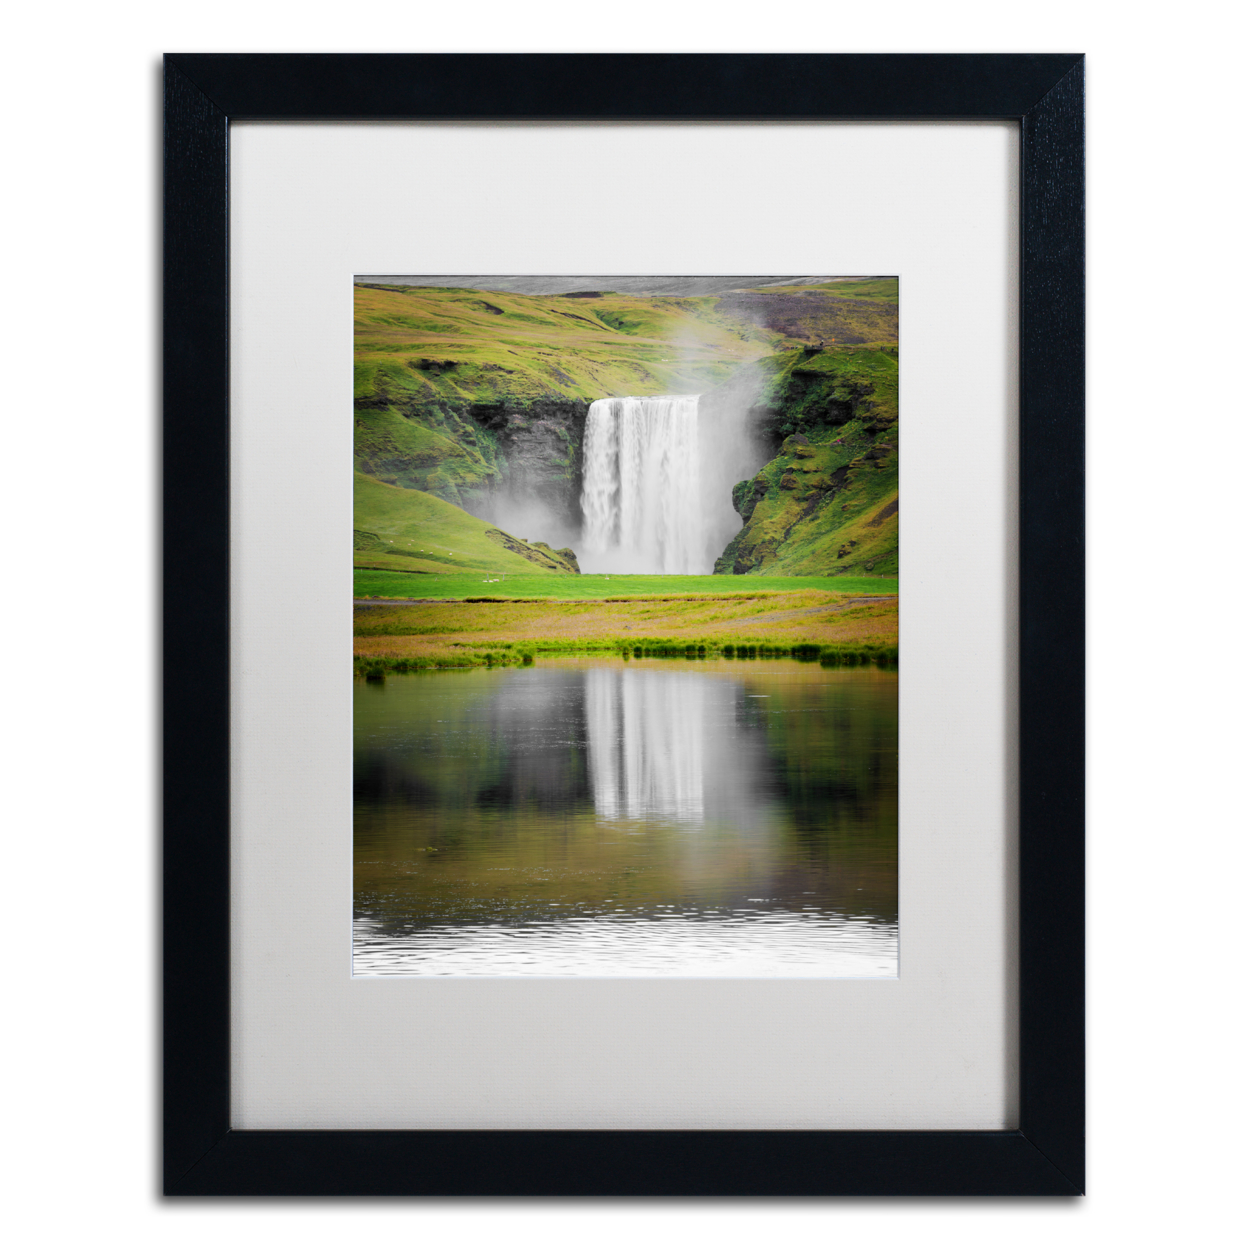 Philippe Sainte-Laudy 'The Reflection Of Skogafoss' Black Wooden Framed Art 18 X 22 Inches